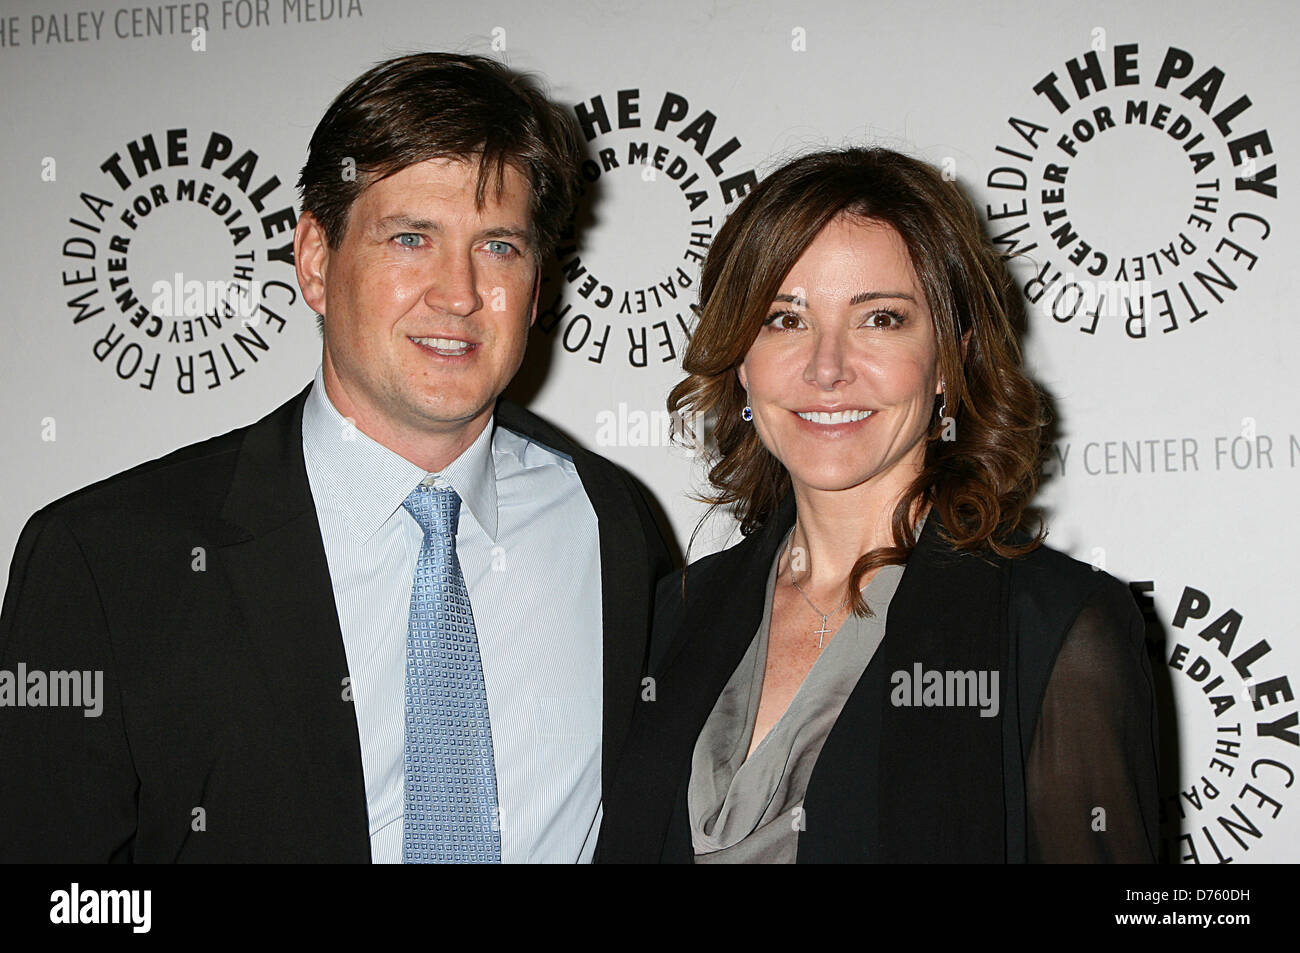 Bill Lawrence and Christa Miller attend a special screening of 'Cougar Town' at The Paley Center for Media in Beverly Hills Stock Photo